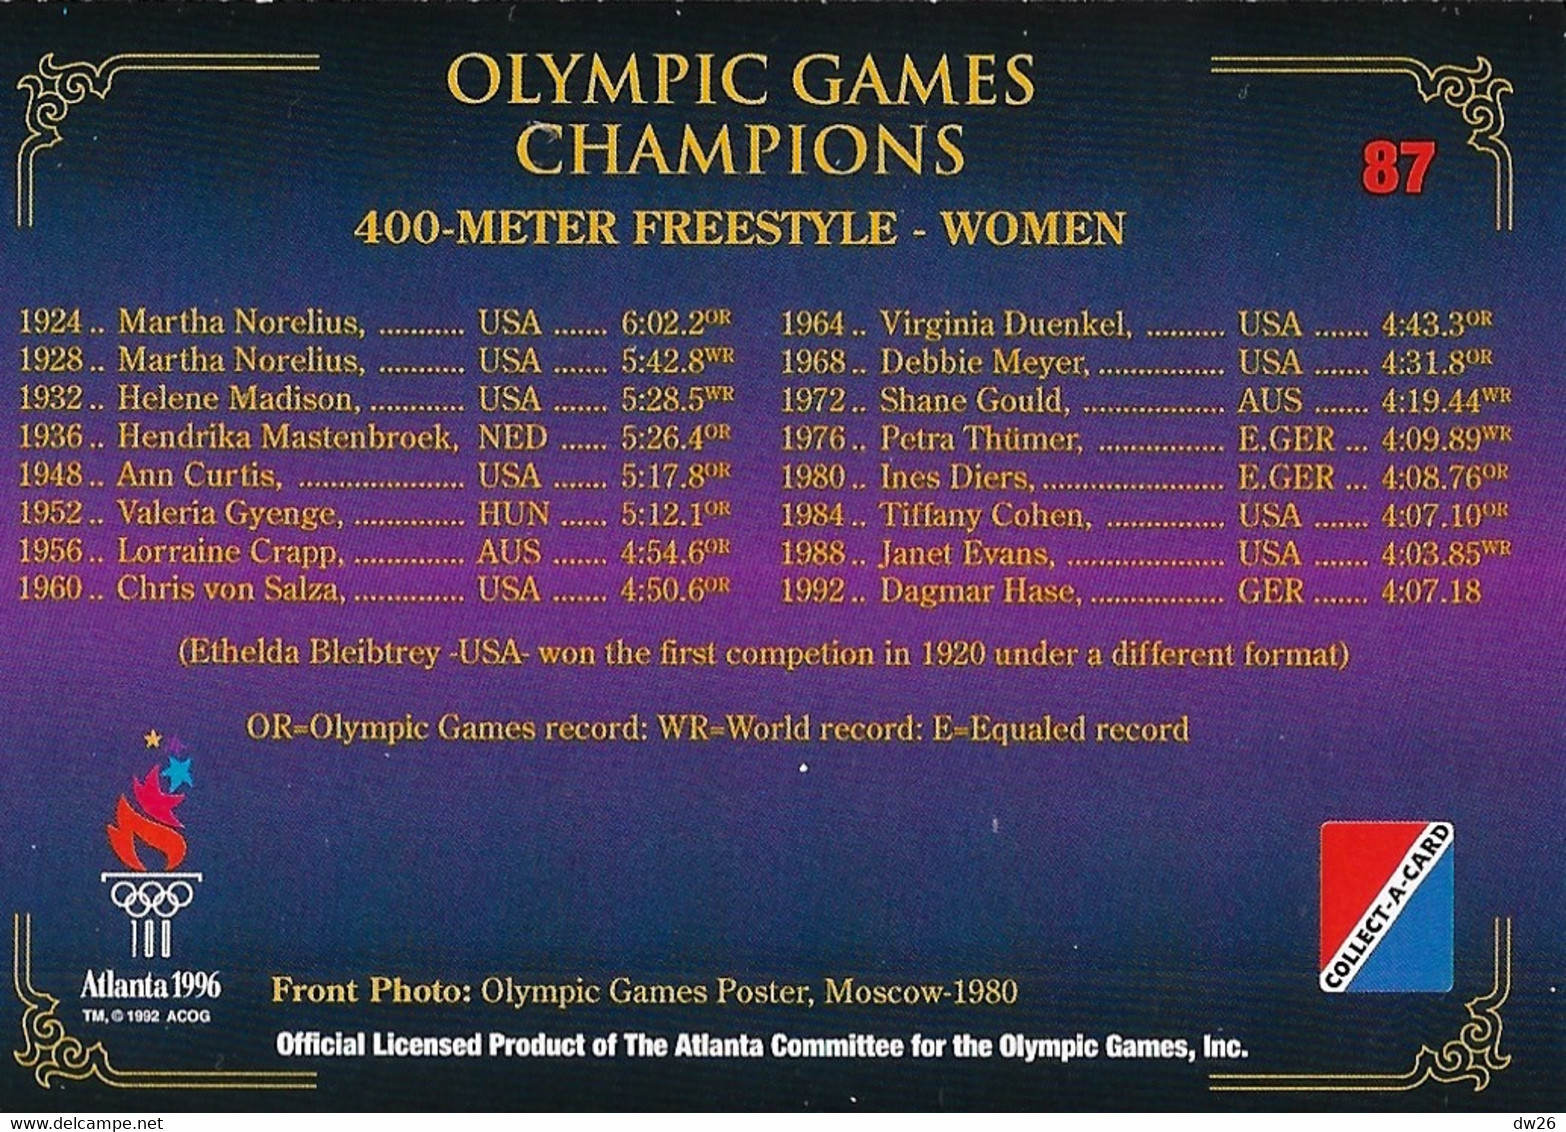 Centennial Olympic Games Atlanta 1996, Collect Card N° 87 - Poster Moscou 1980 - Palmarès 400 M Women Natation - Trading Cards